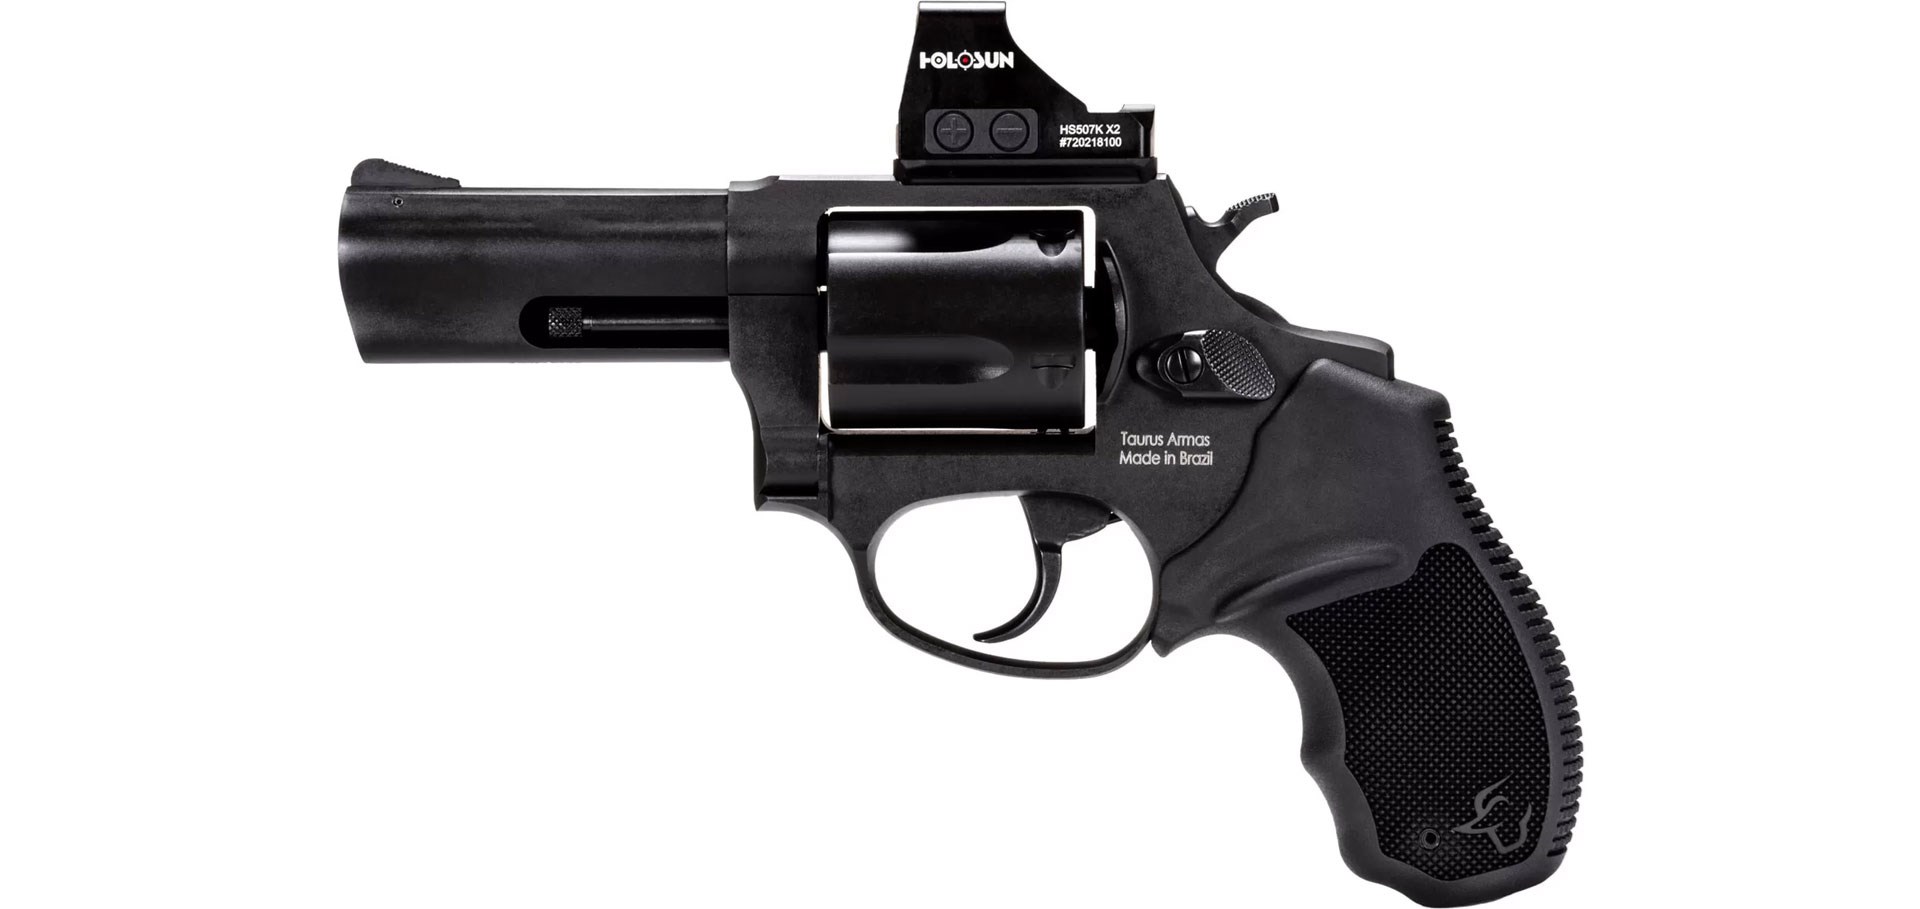 Taurus USA Model 605 T.O.R.O. black revolver .357 magnum left-side view on white shown with holosun optic mounted on top of gun